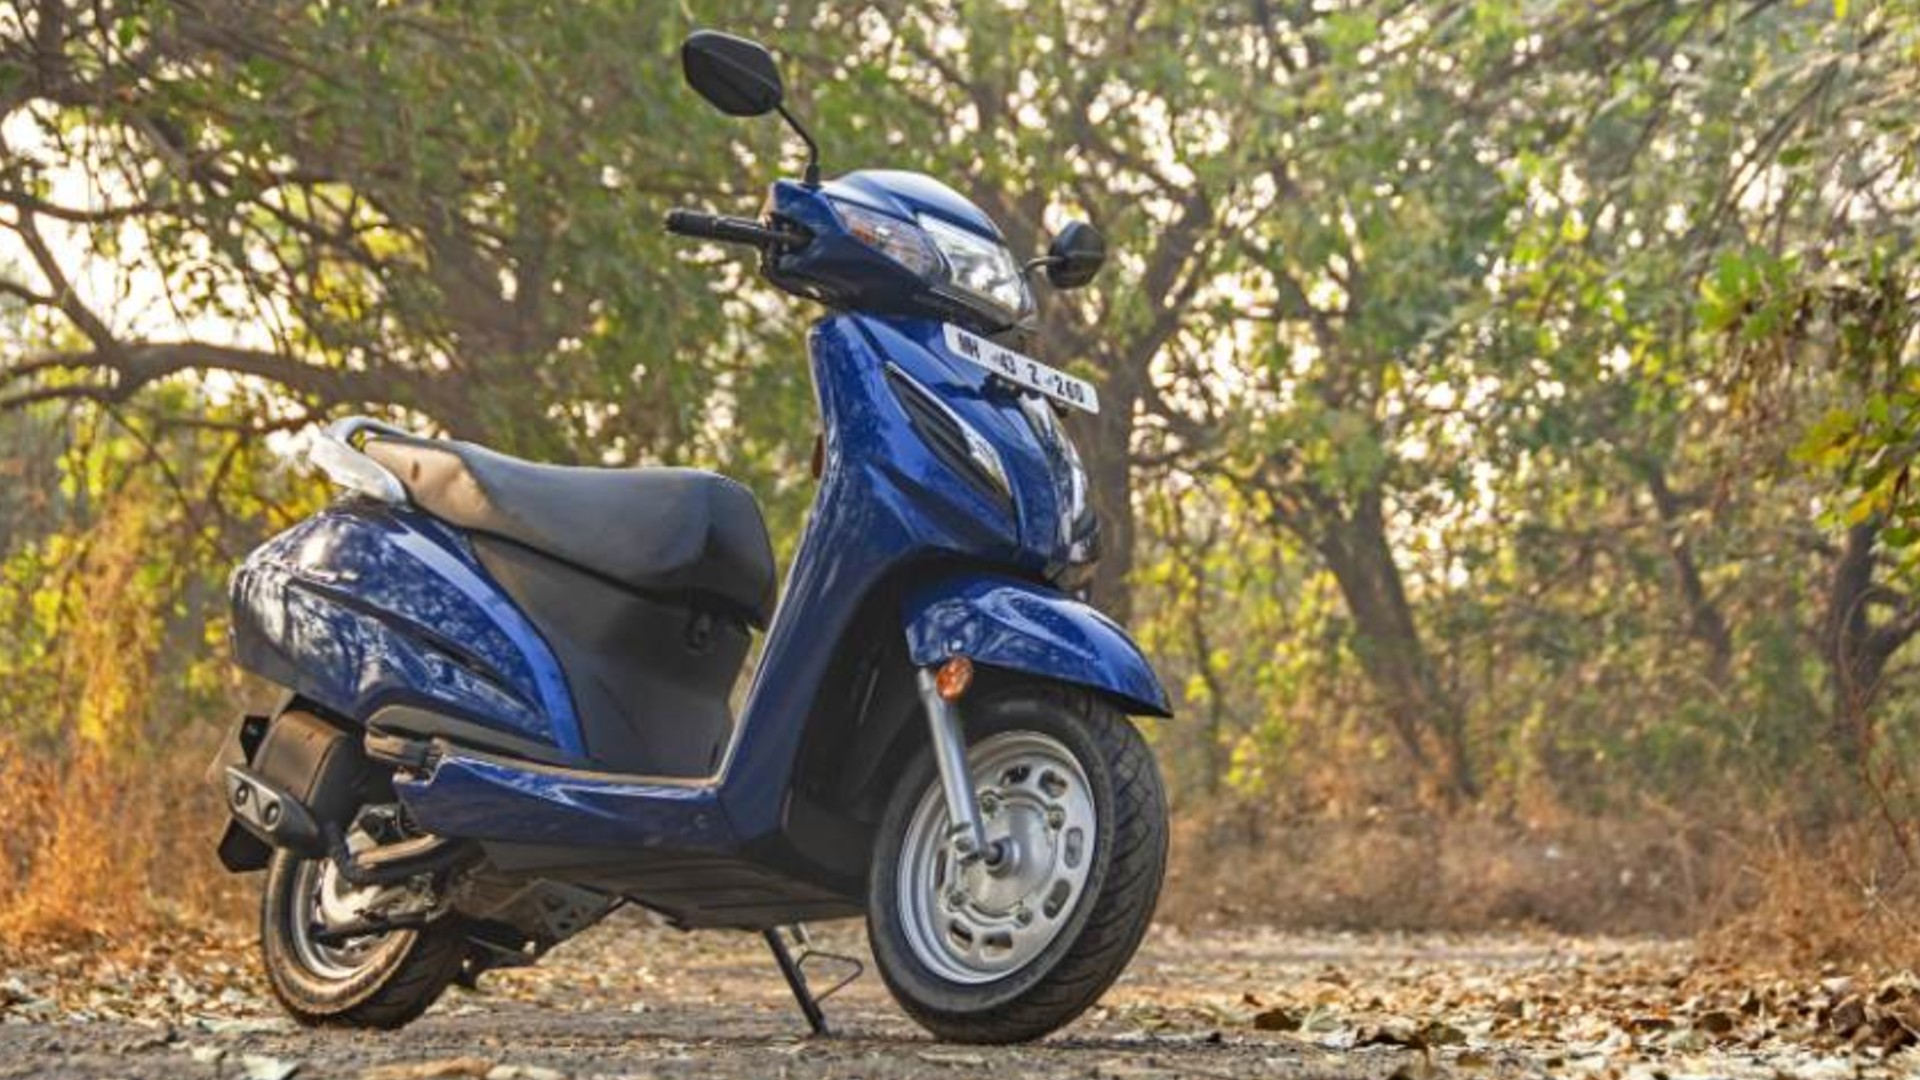 You Can Convert Your Honda Activa To An Electric Scooter For Just Rs 39,000!